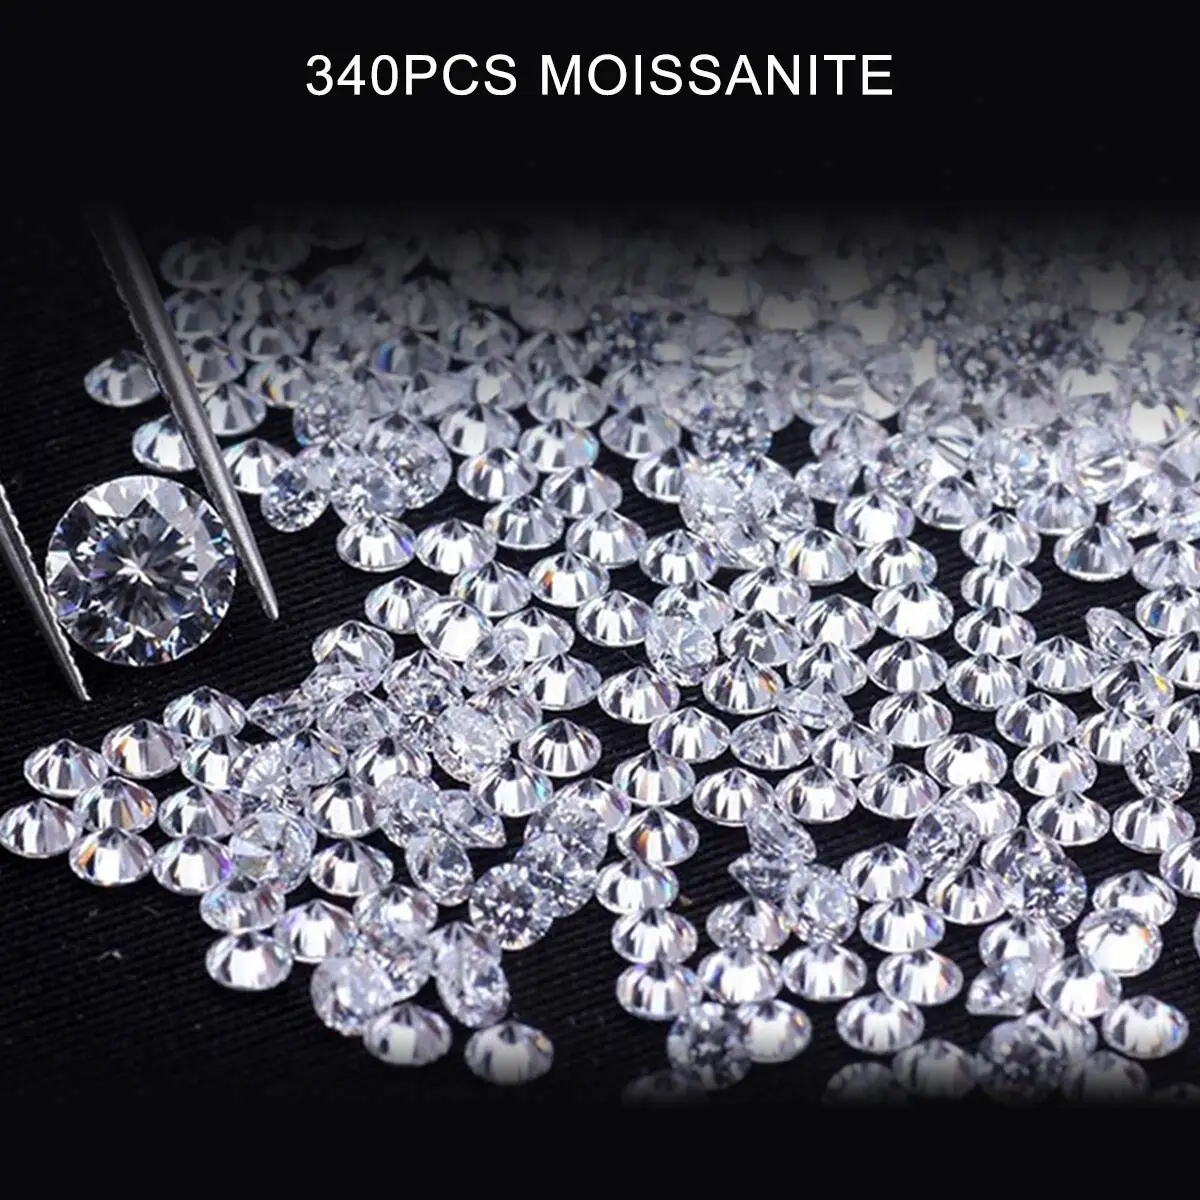 

Direct Selling Szjinao 340PCS Small Loose Gemstones Moissanite Stones 0.8mm To 2.9mm D VVS1 Jewelry Color Cut Loose Excellent